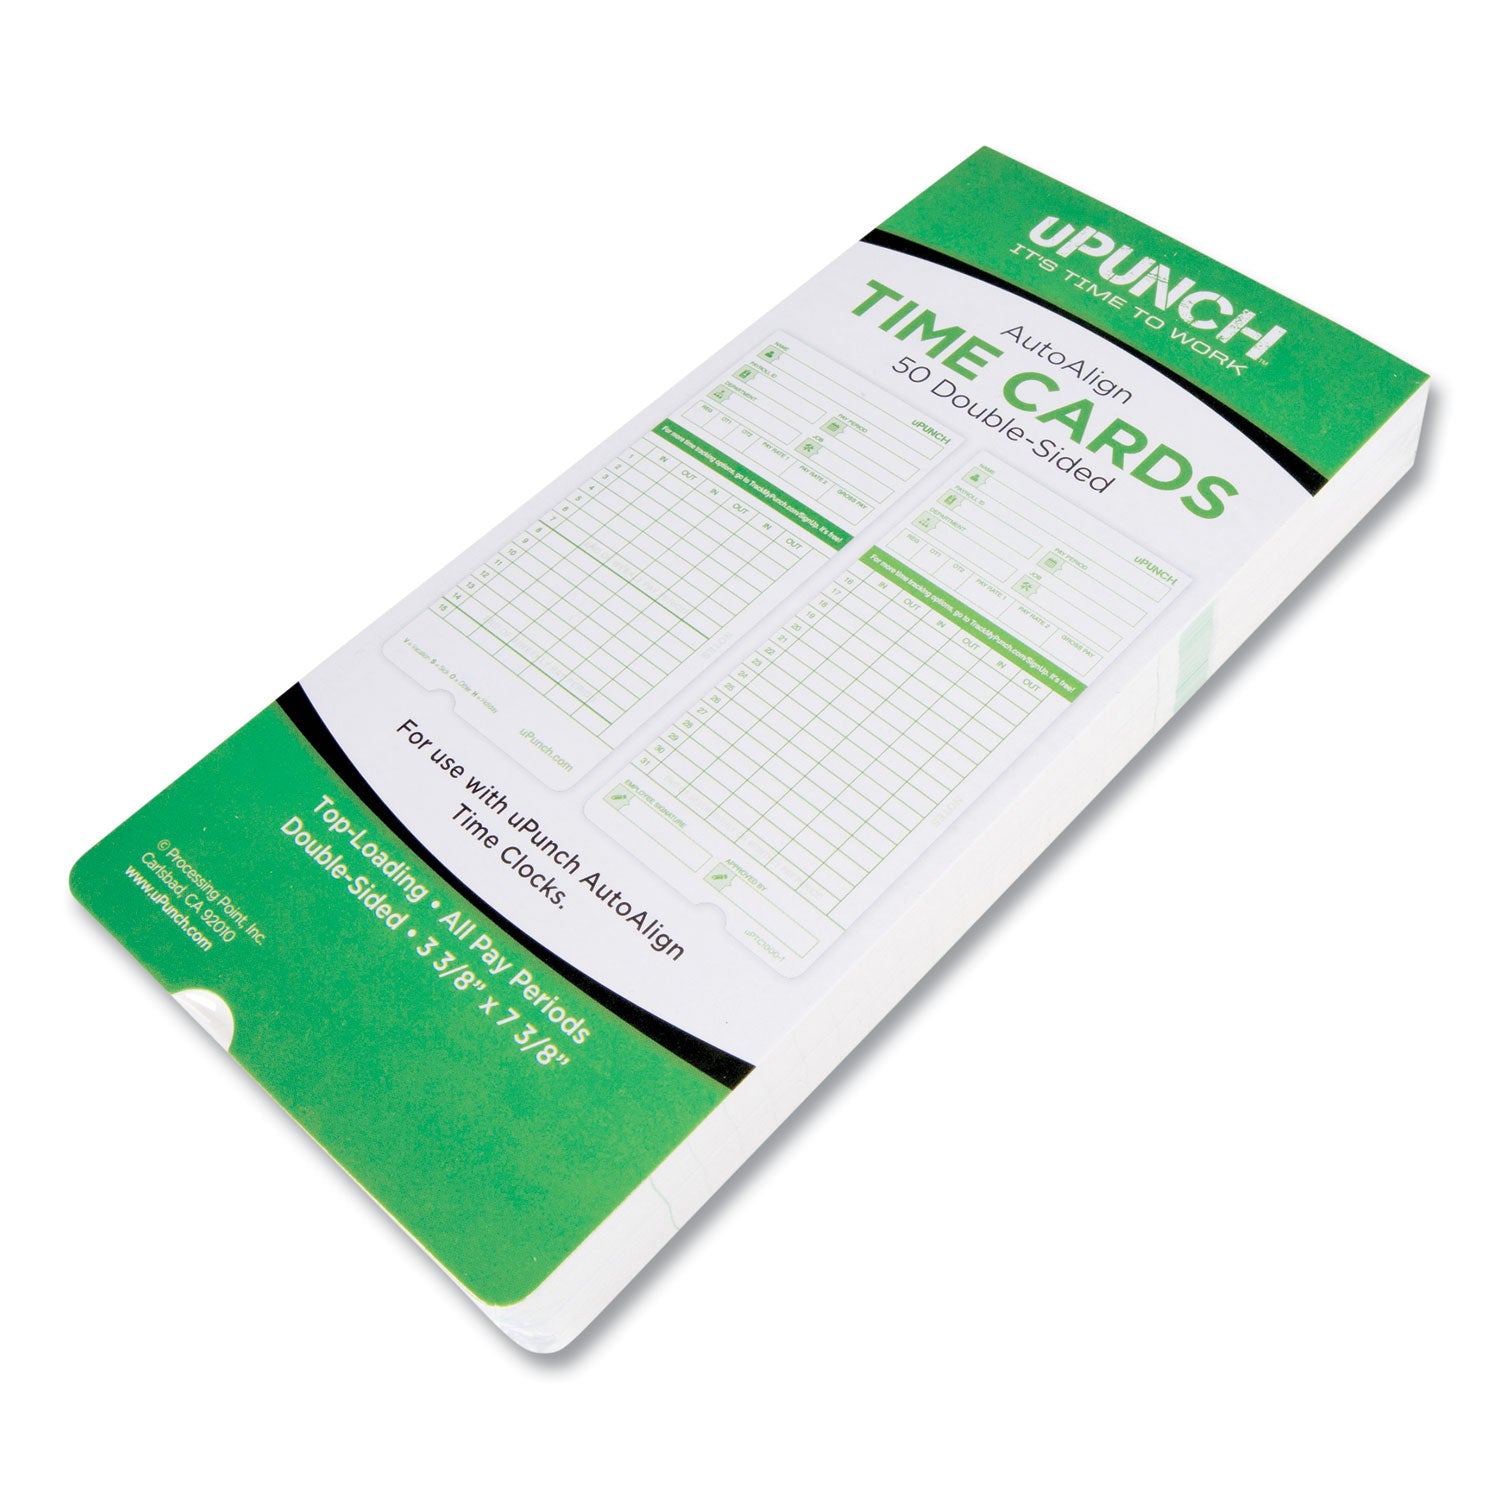 time-clock-cards-for-upunch-hn3000-two-sides-737-x-337-50-pack_ppzhntcg1050 - 1